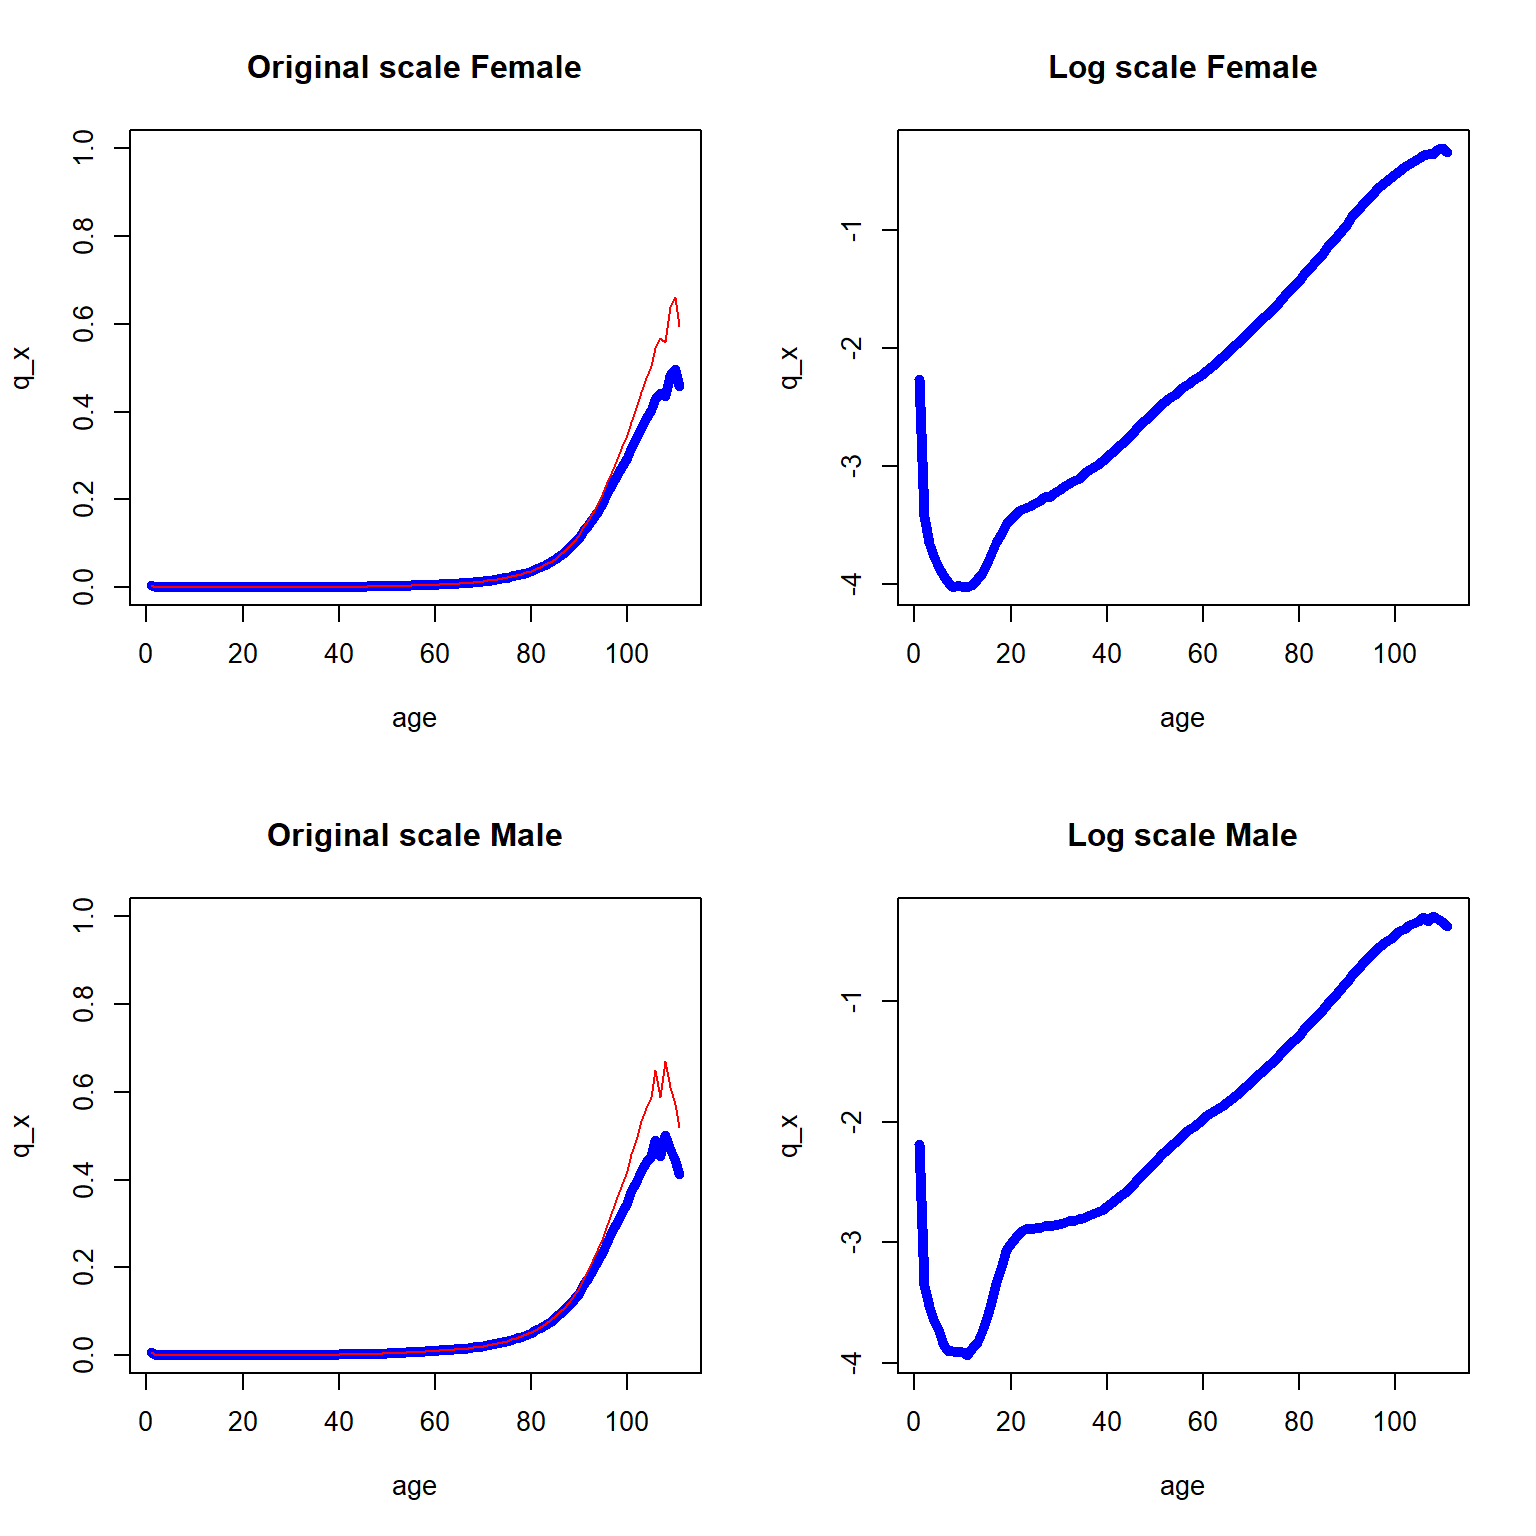 One year death probability curve (in blue) and central death rate (in red) for the 2010-2014 U.S. data across all ages